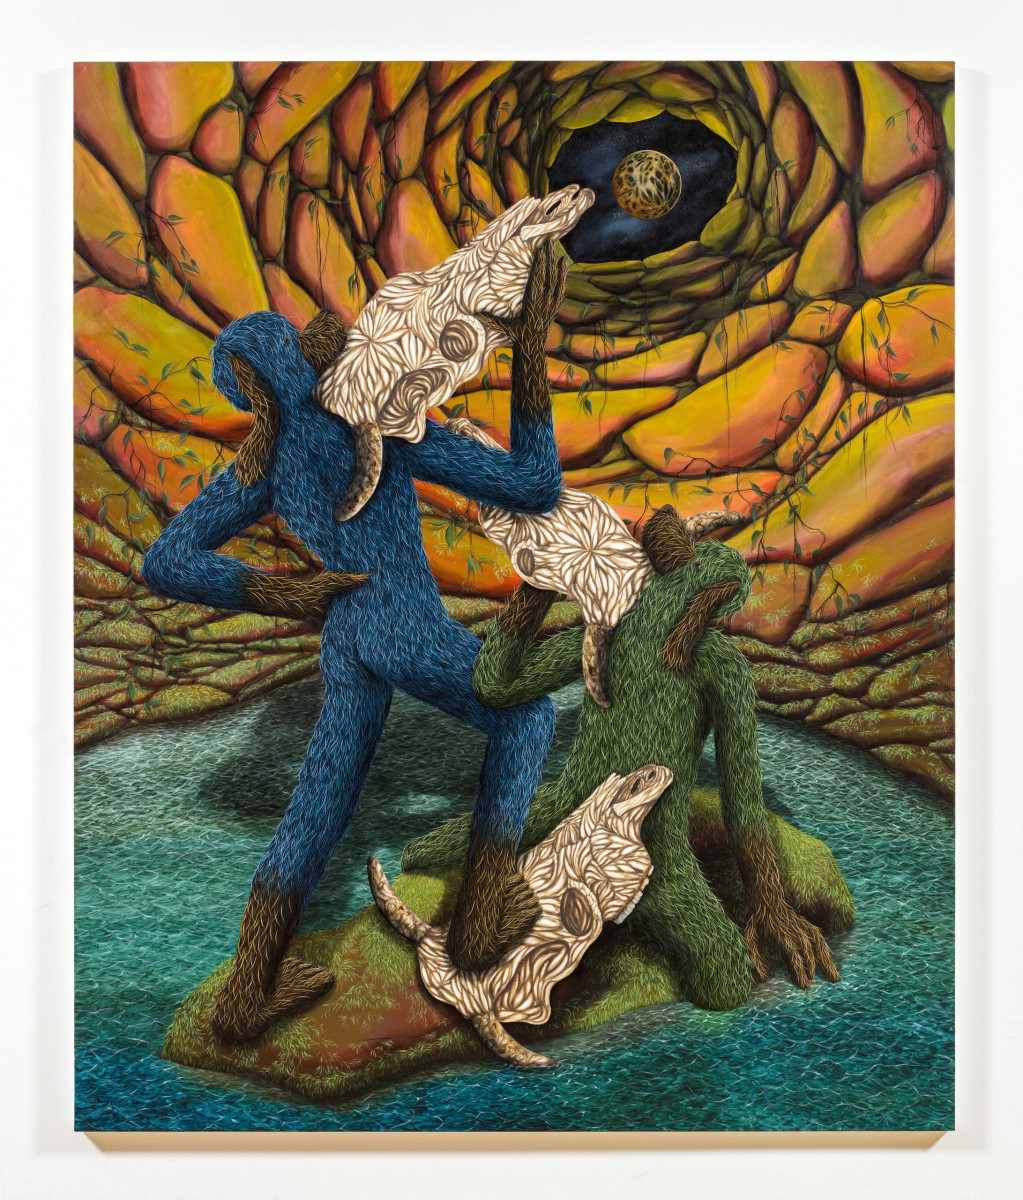 Drew Dodge. <em>Howl At The Moon</em>, 2023. Oil on canvas, 102 x 84 inches (259.1 x 213.4 cm)